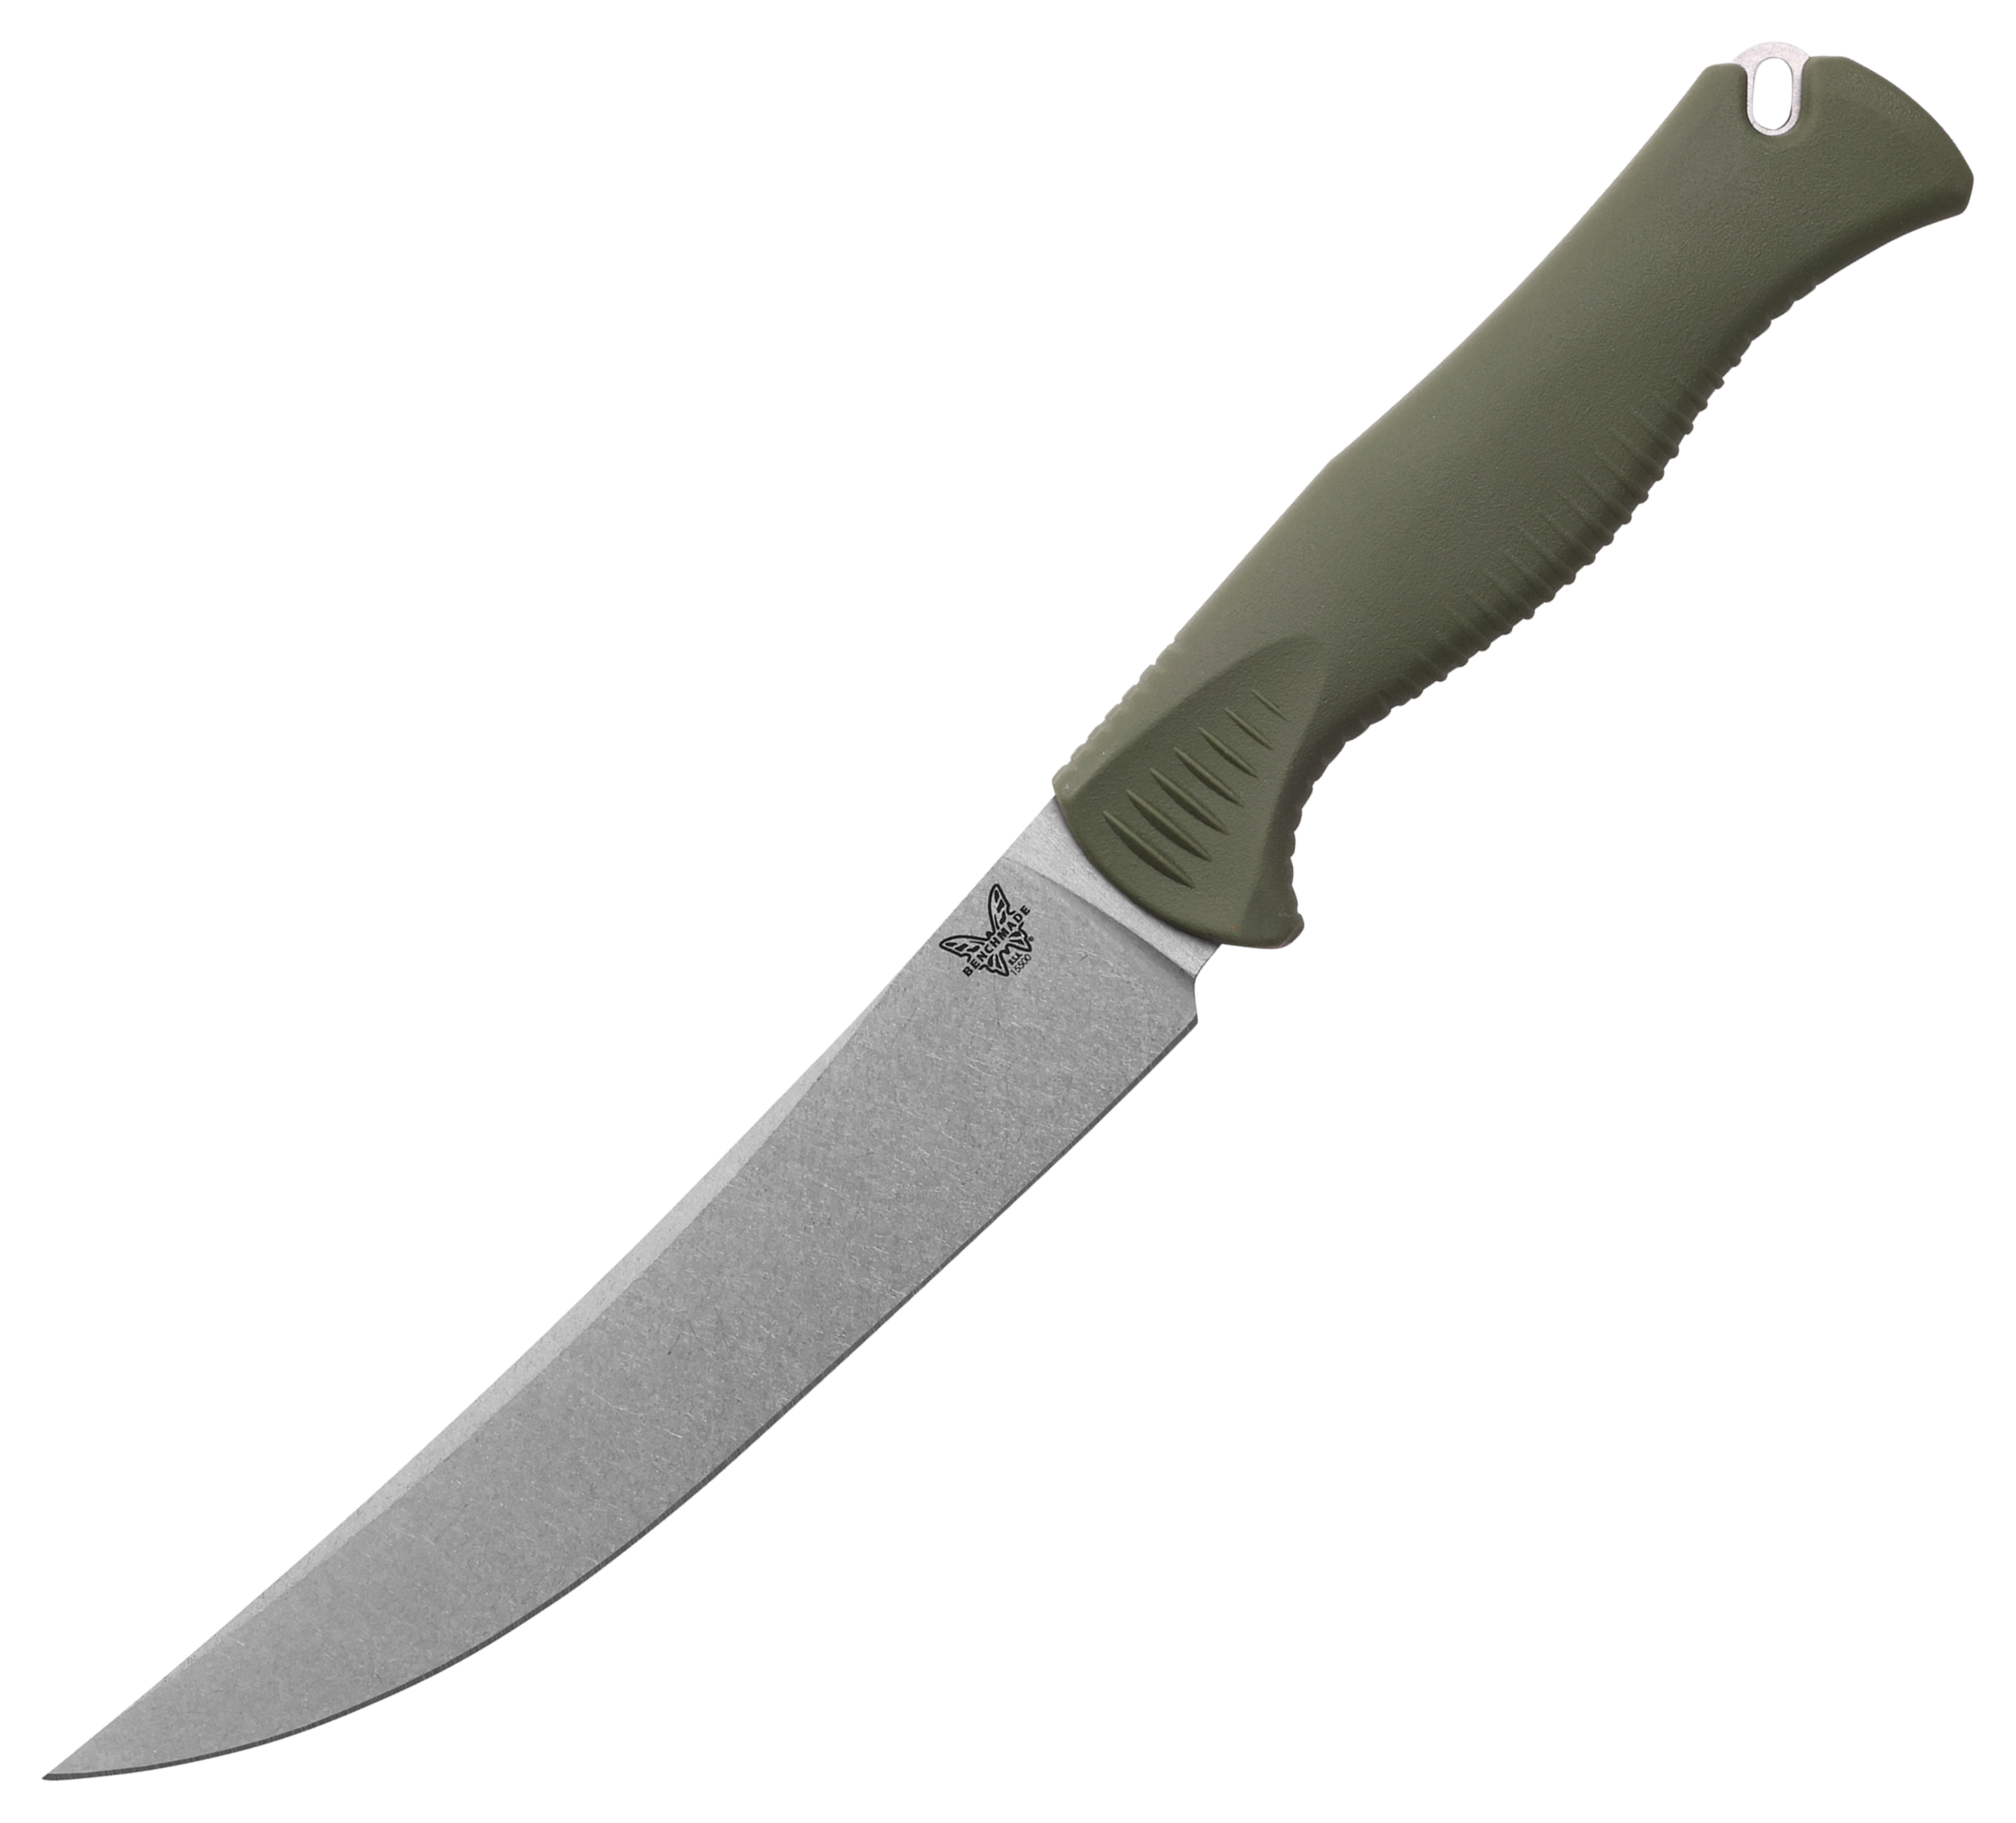 Benchmade Meatcrafter 6″ Fixed-Blade Hunting Knife with Santoprene Handle